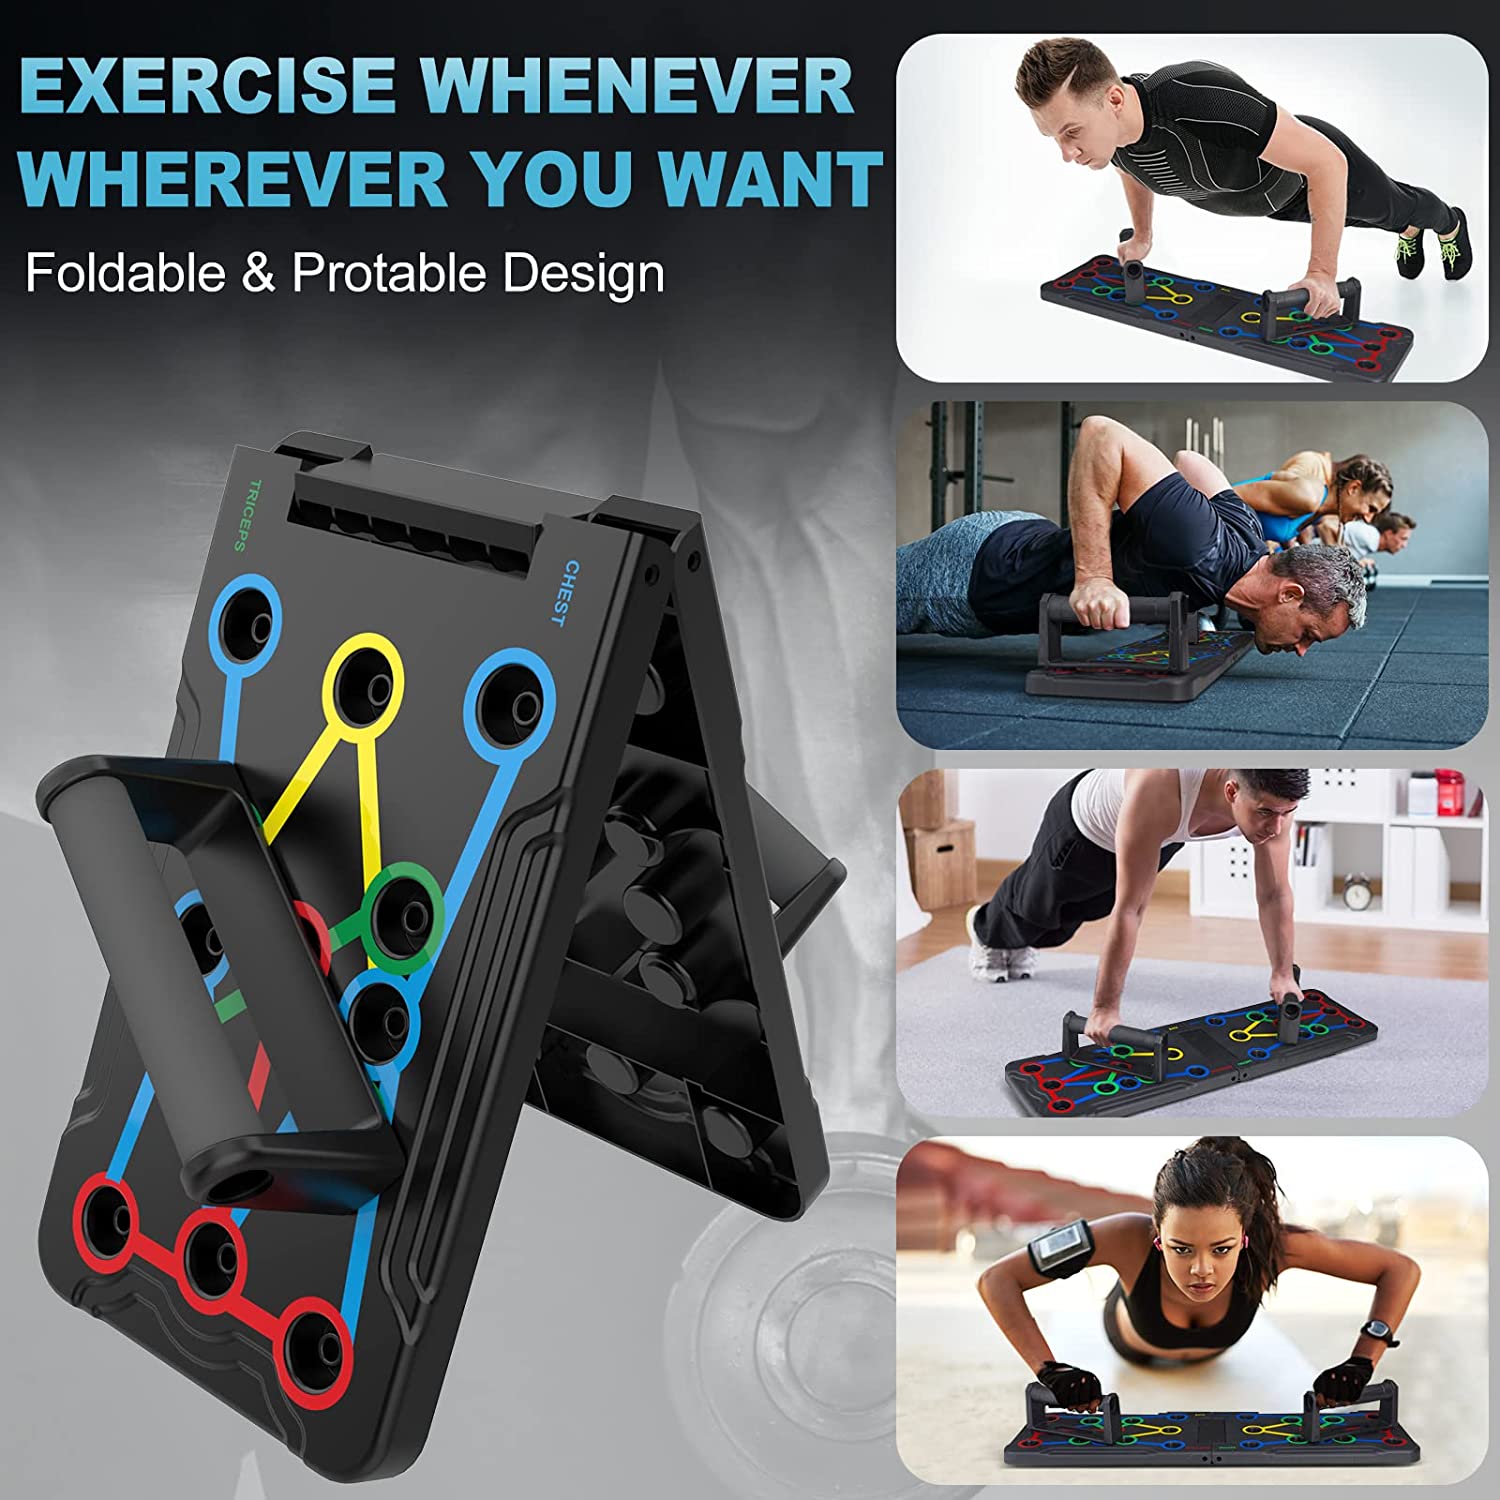 Foldable Pushup board Fitness Stand for Portable Strength Training. Rugged, Stable Equipment for Home Gym Workout for Men & Women, Gift for Boyfriend